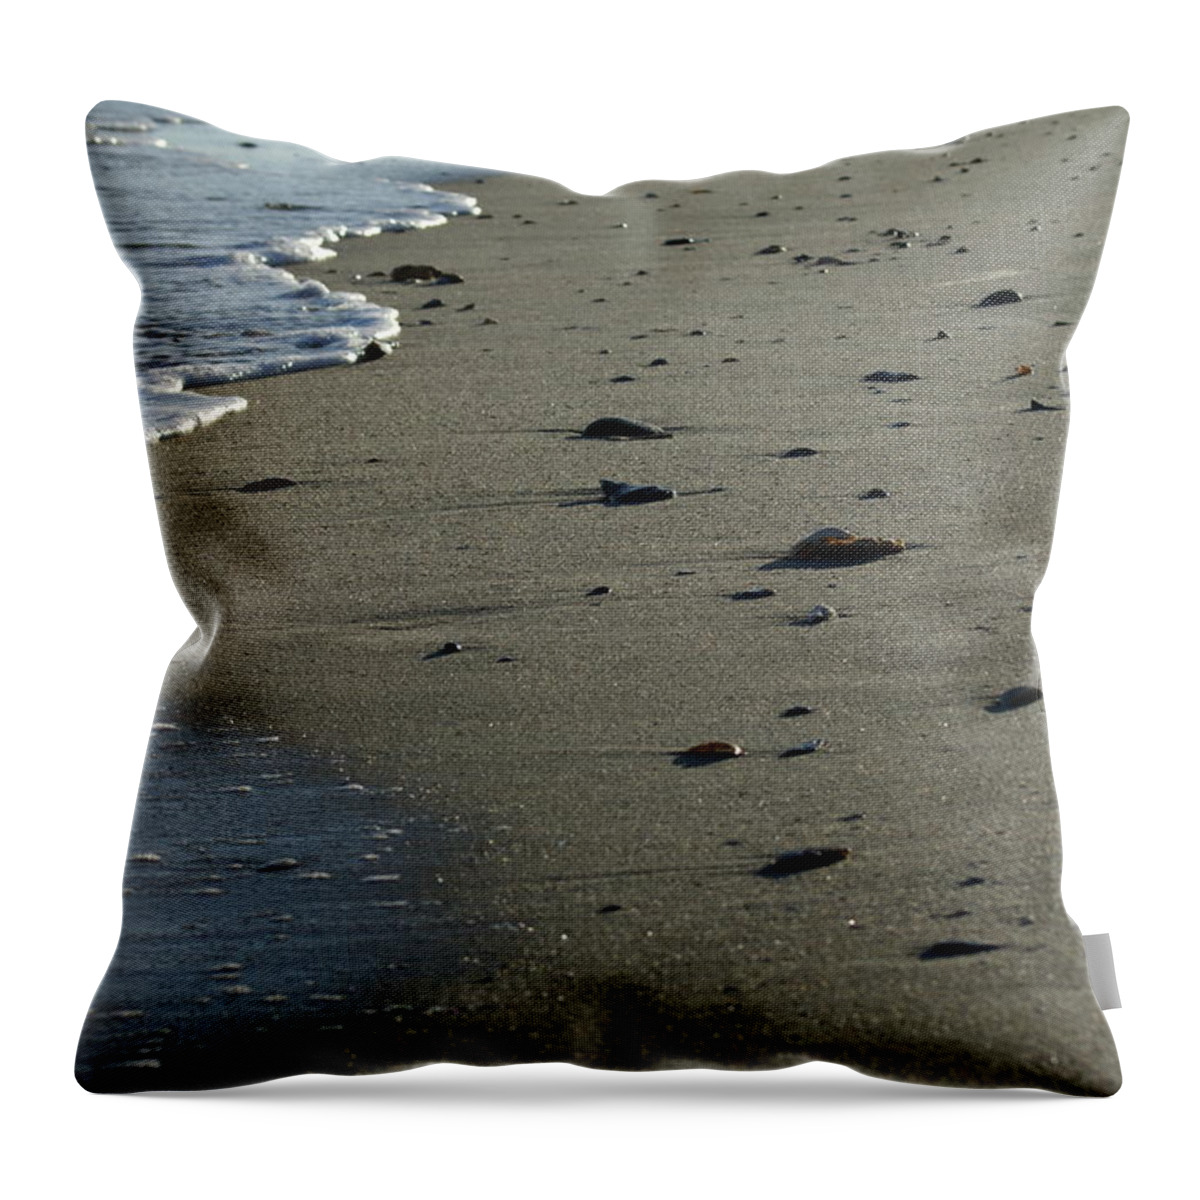  Throw Pillow featuring the photograph Washed Ashore by Heather E Harman